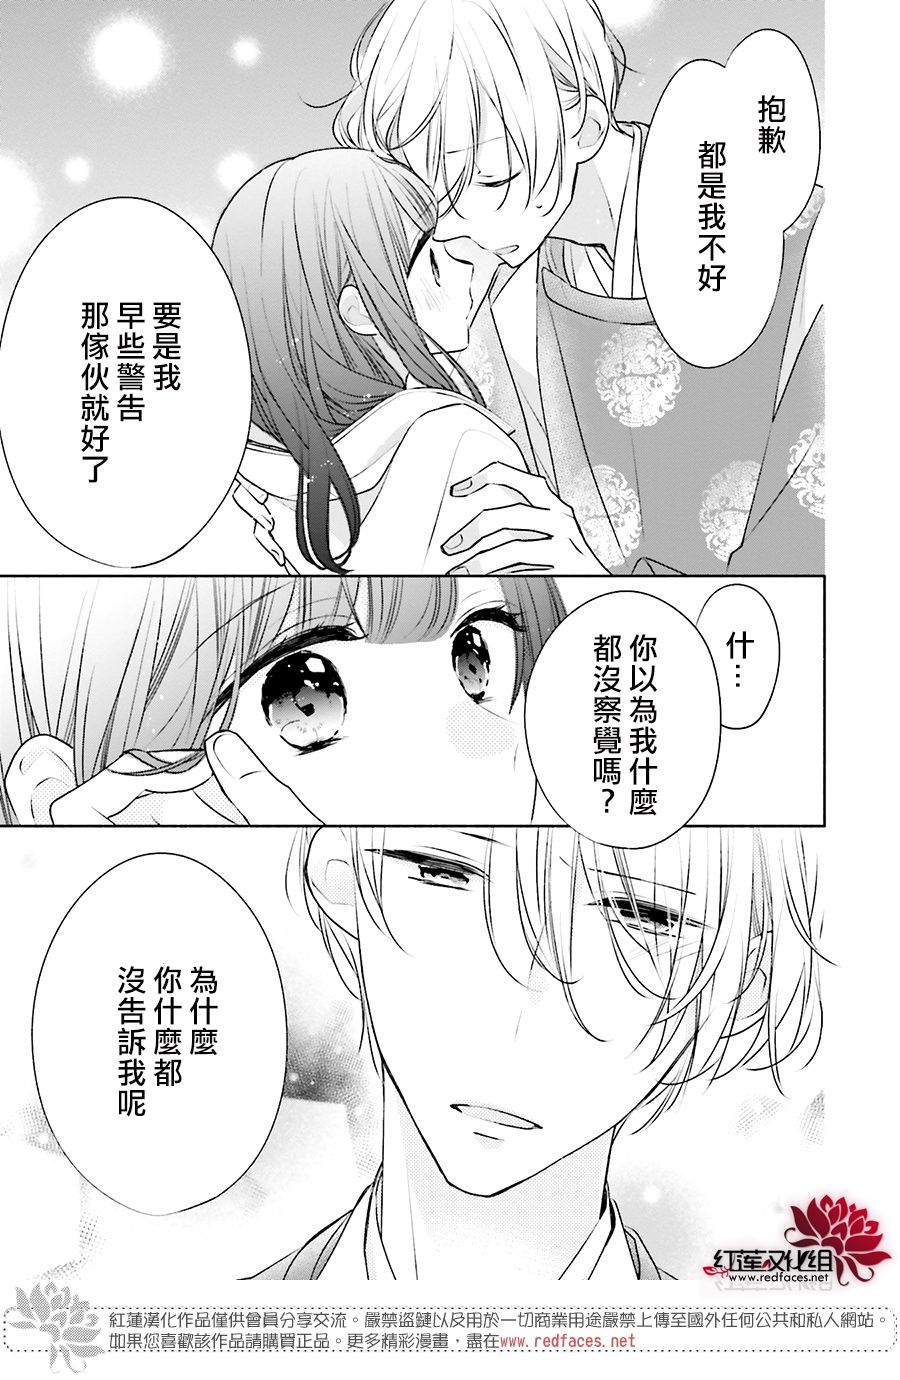 If given a second chance - 24话 - 6